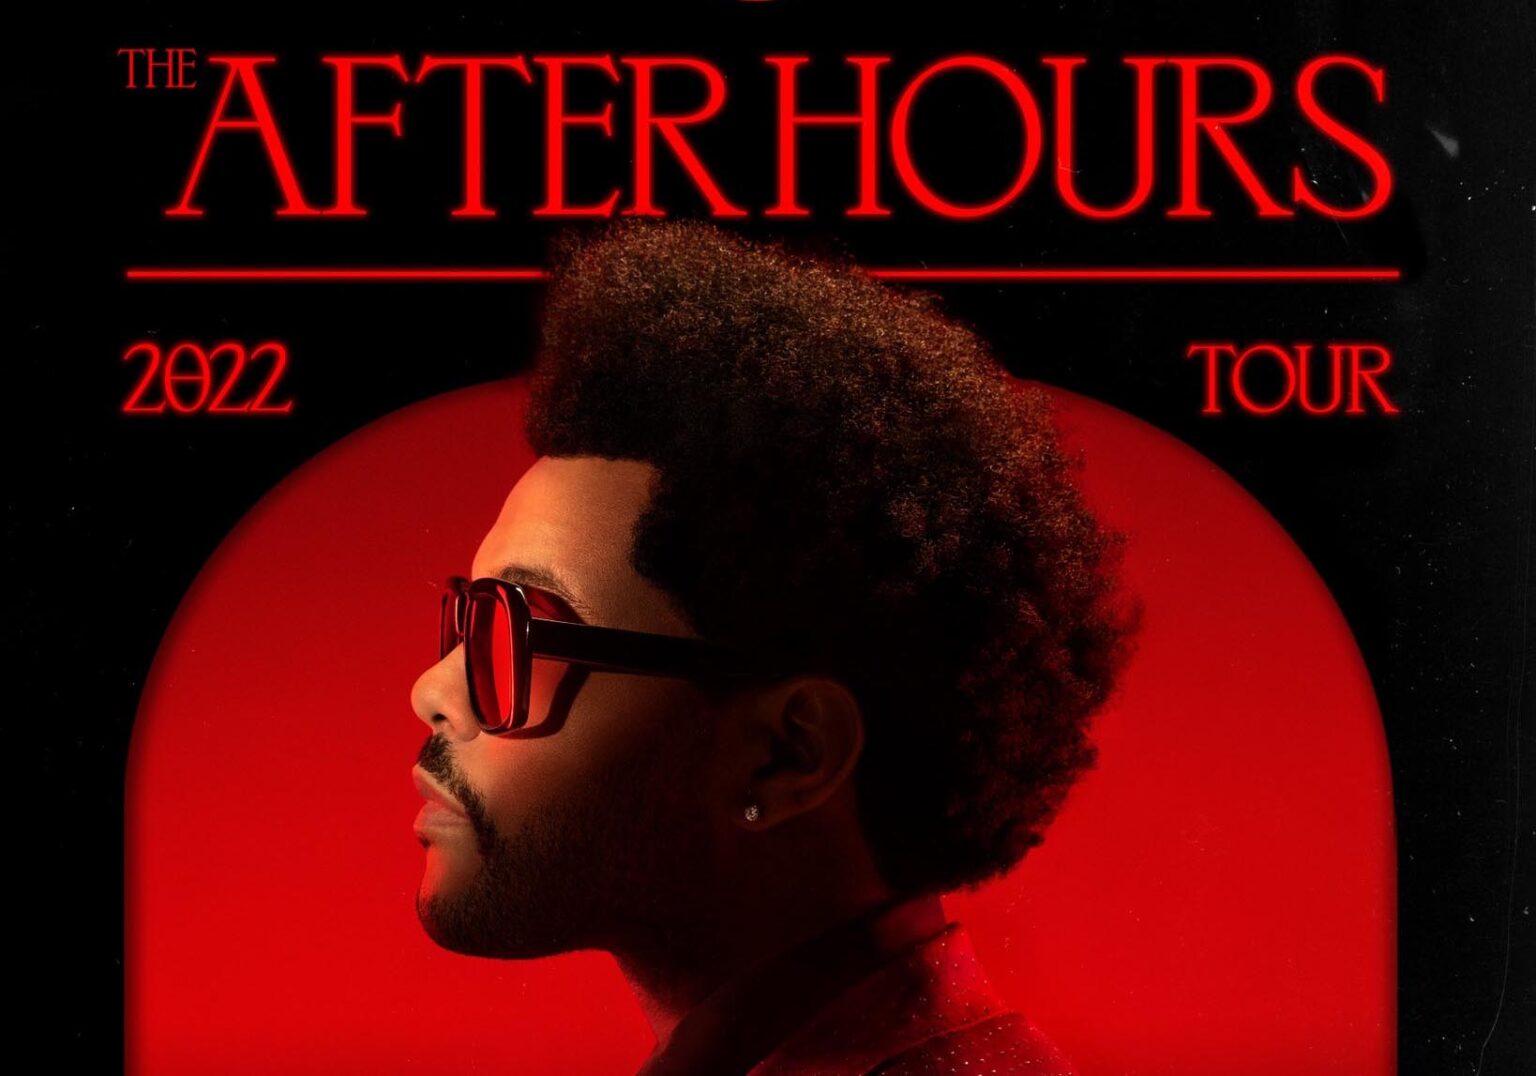 When The Weeknd posted his After Hours 2022 Tour and all the dates fans in the replies were mostly upset & confused. Here's why.